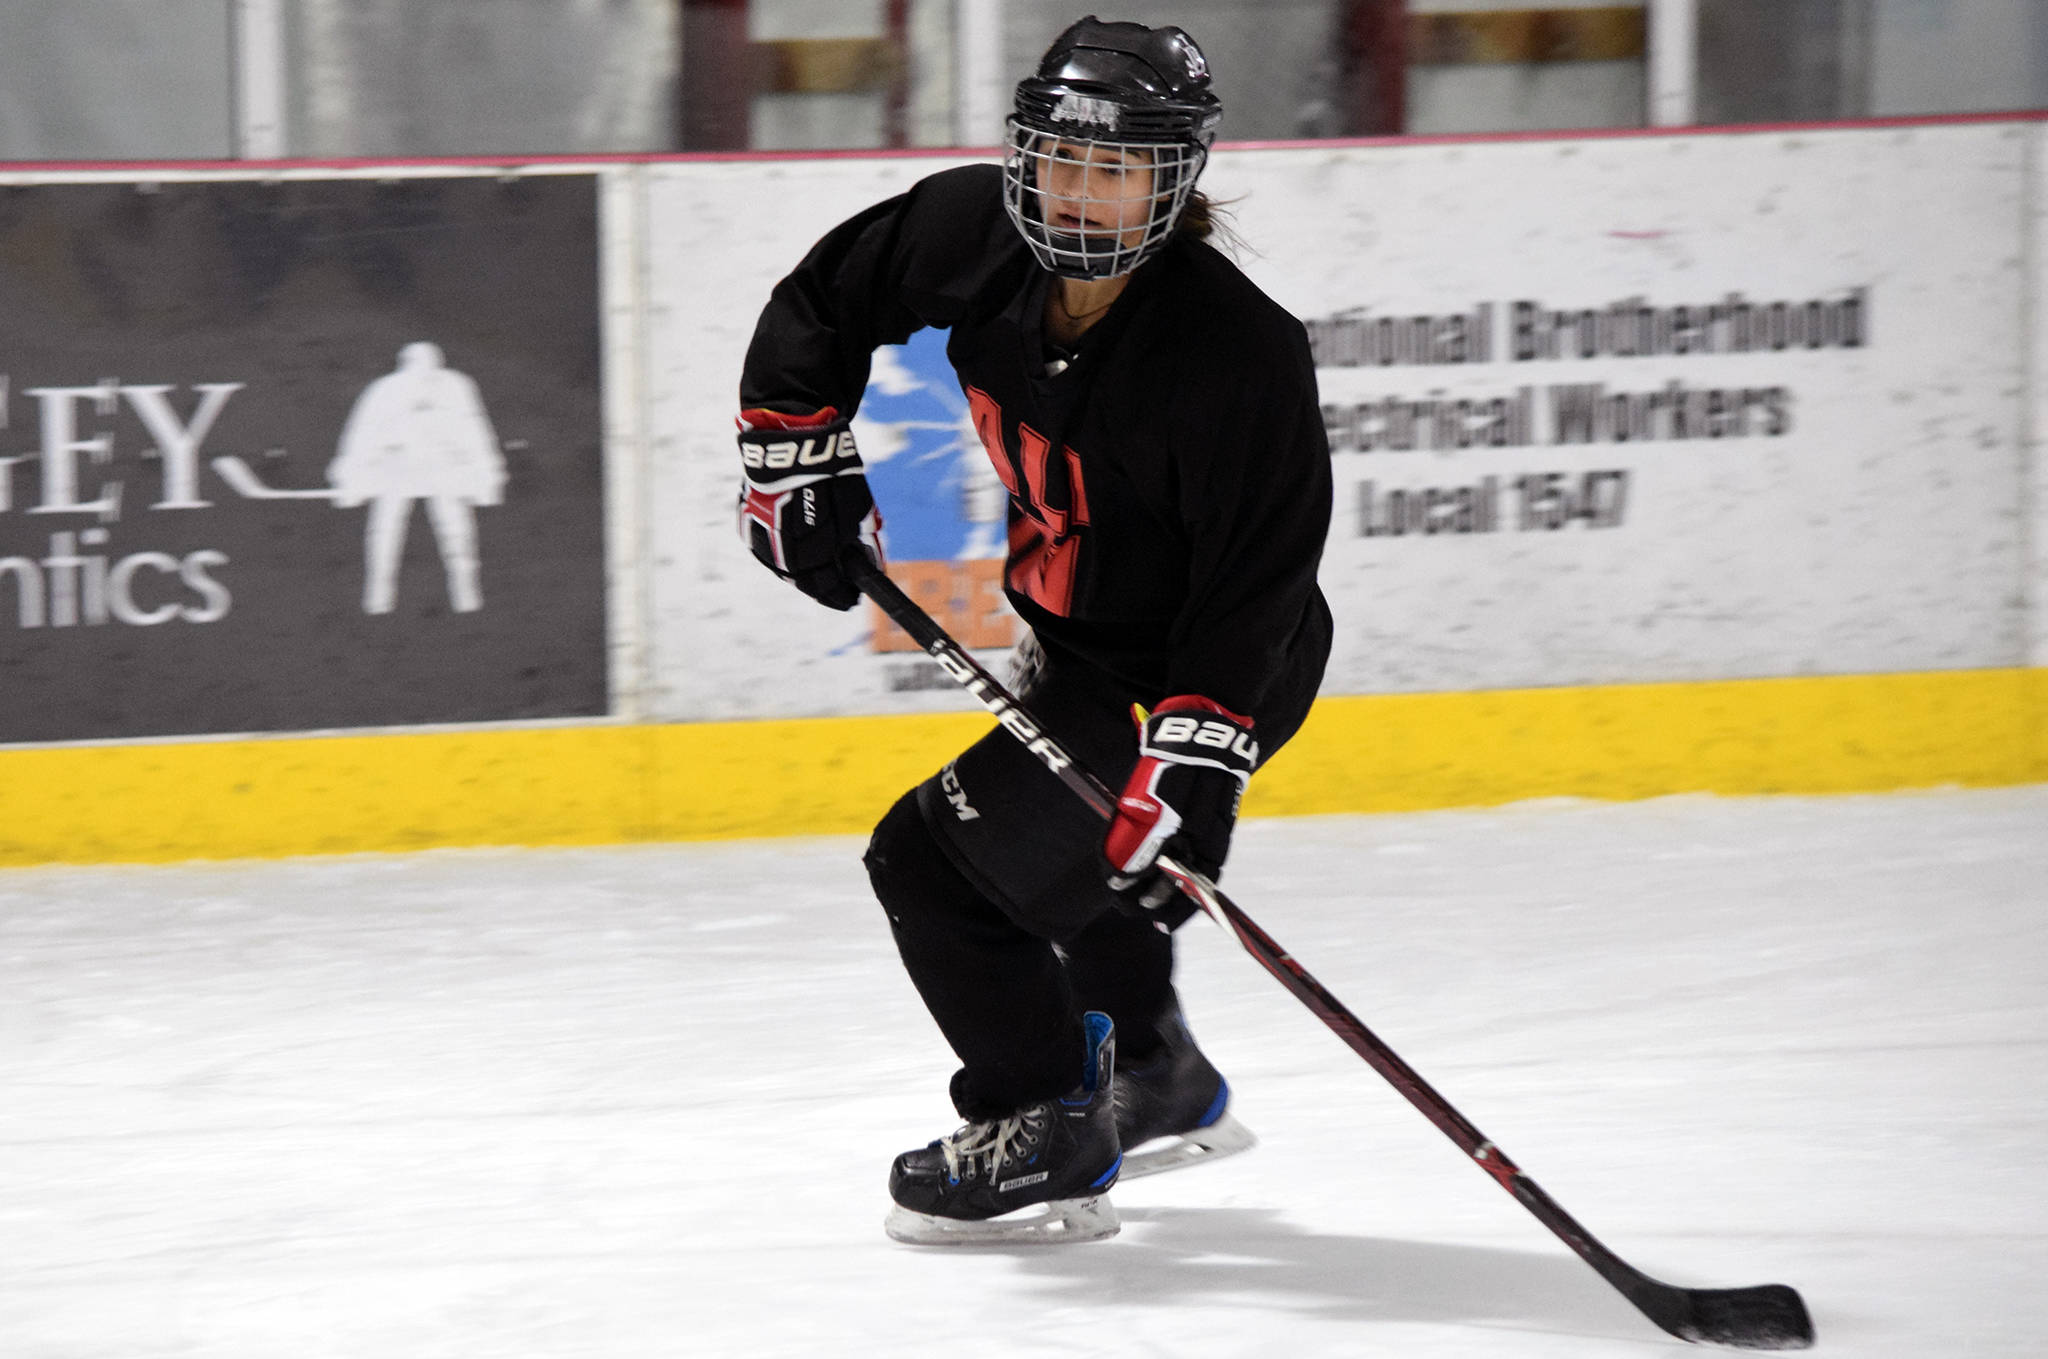 Juneau-Douglas: Yadaat.at Kale sophomore Nikki Lahnum participates in a skating drill during JDHS hockey practice at Treadwell Arena on Thursday, Oct. 31, 2019. (Nolin Ainsworth | Juneau Empire)